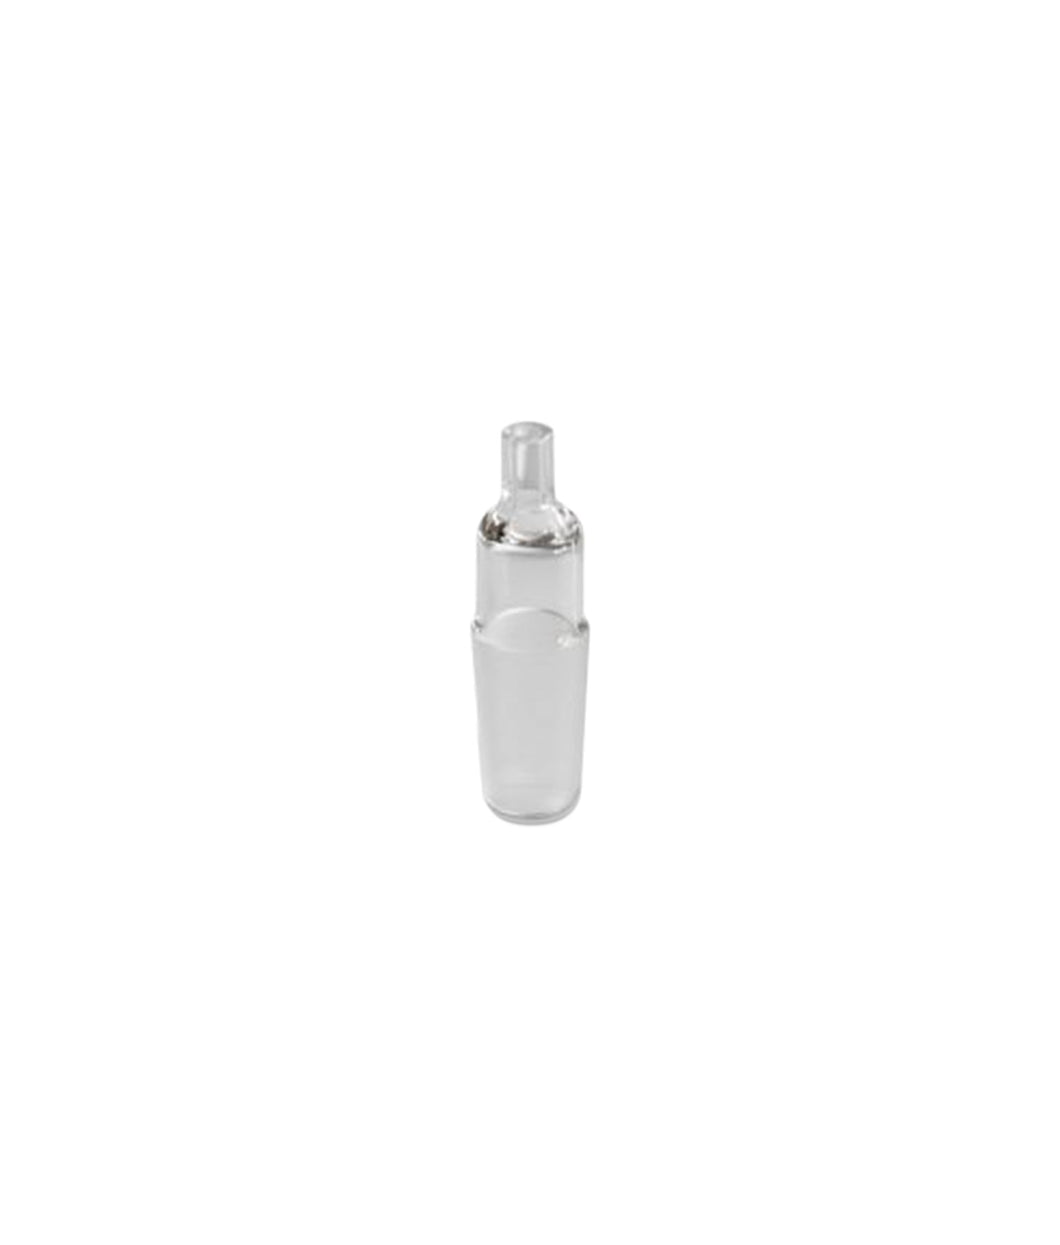 MiniVAP - GLASS WPA (Water Piece Attachment) - 14mm MALE JOINT with MALE END TO ATTACH TO FLEXICONE+ ONLY! PLEASE NOTE THIS IS A NEW VERSION THAT WILL NOT ATTACH TO THE FLEXICONE AND LID